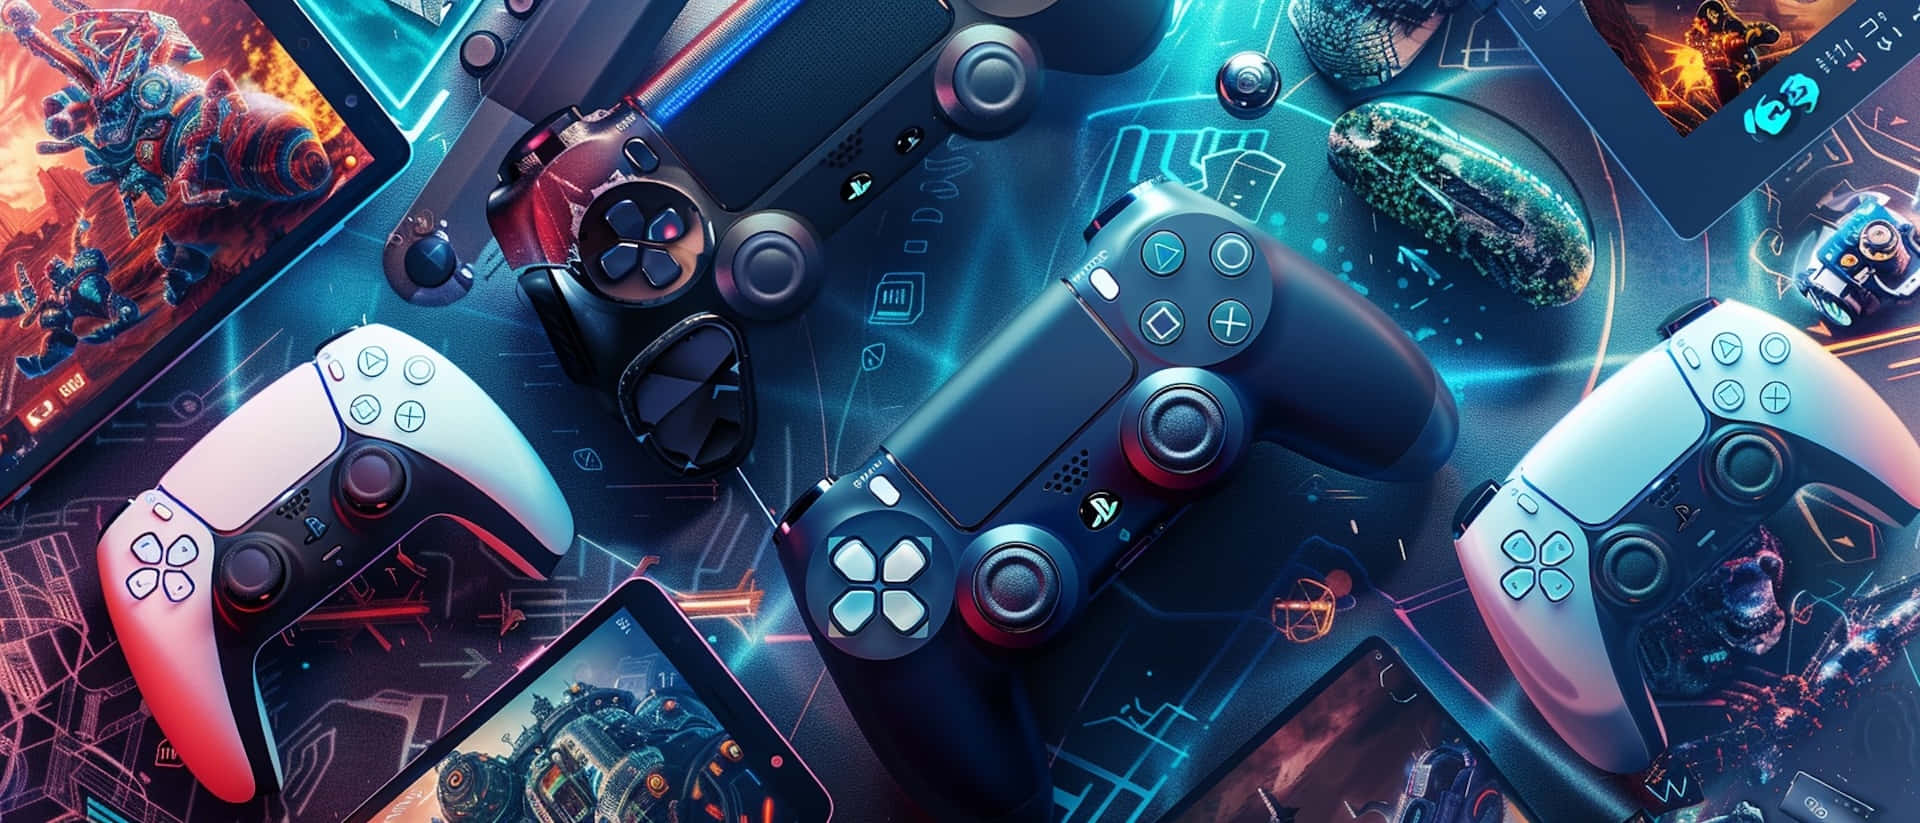 Play Station Controllersand Games Collage Wallpaper